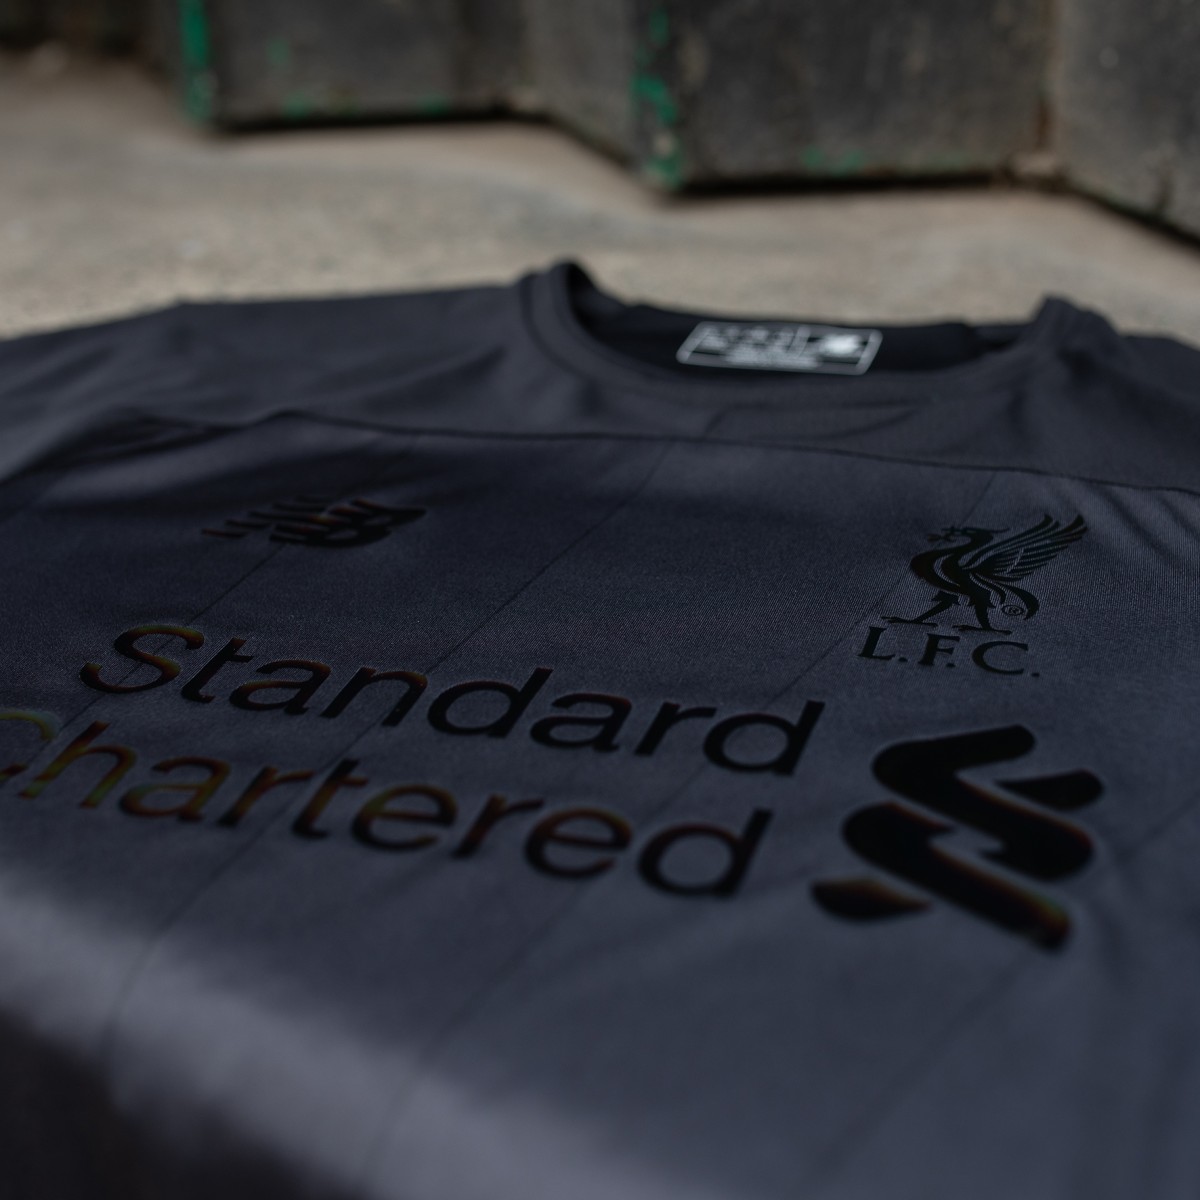 liverpool black limited edition jersey 2018